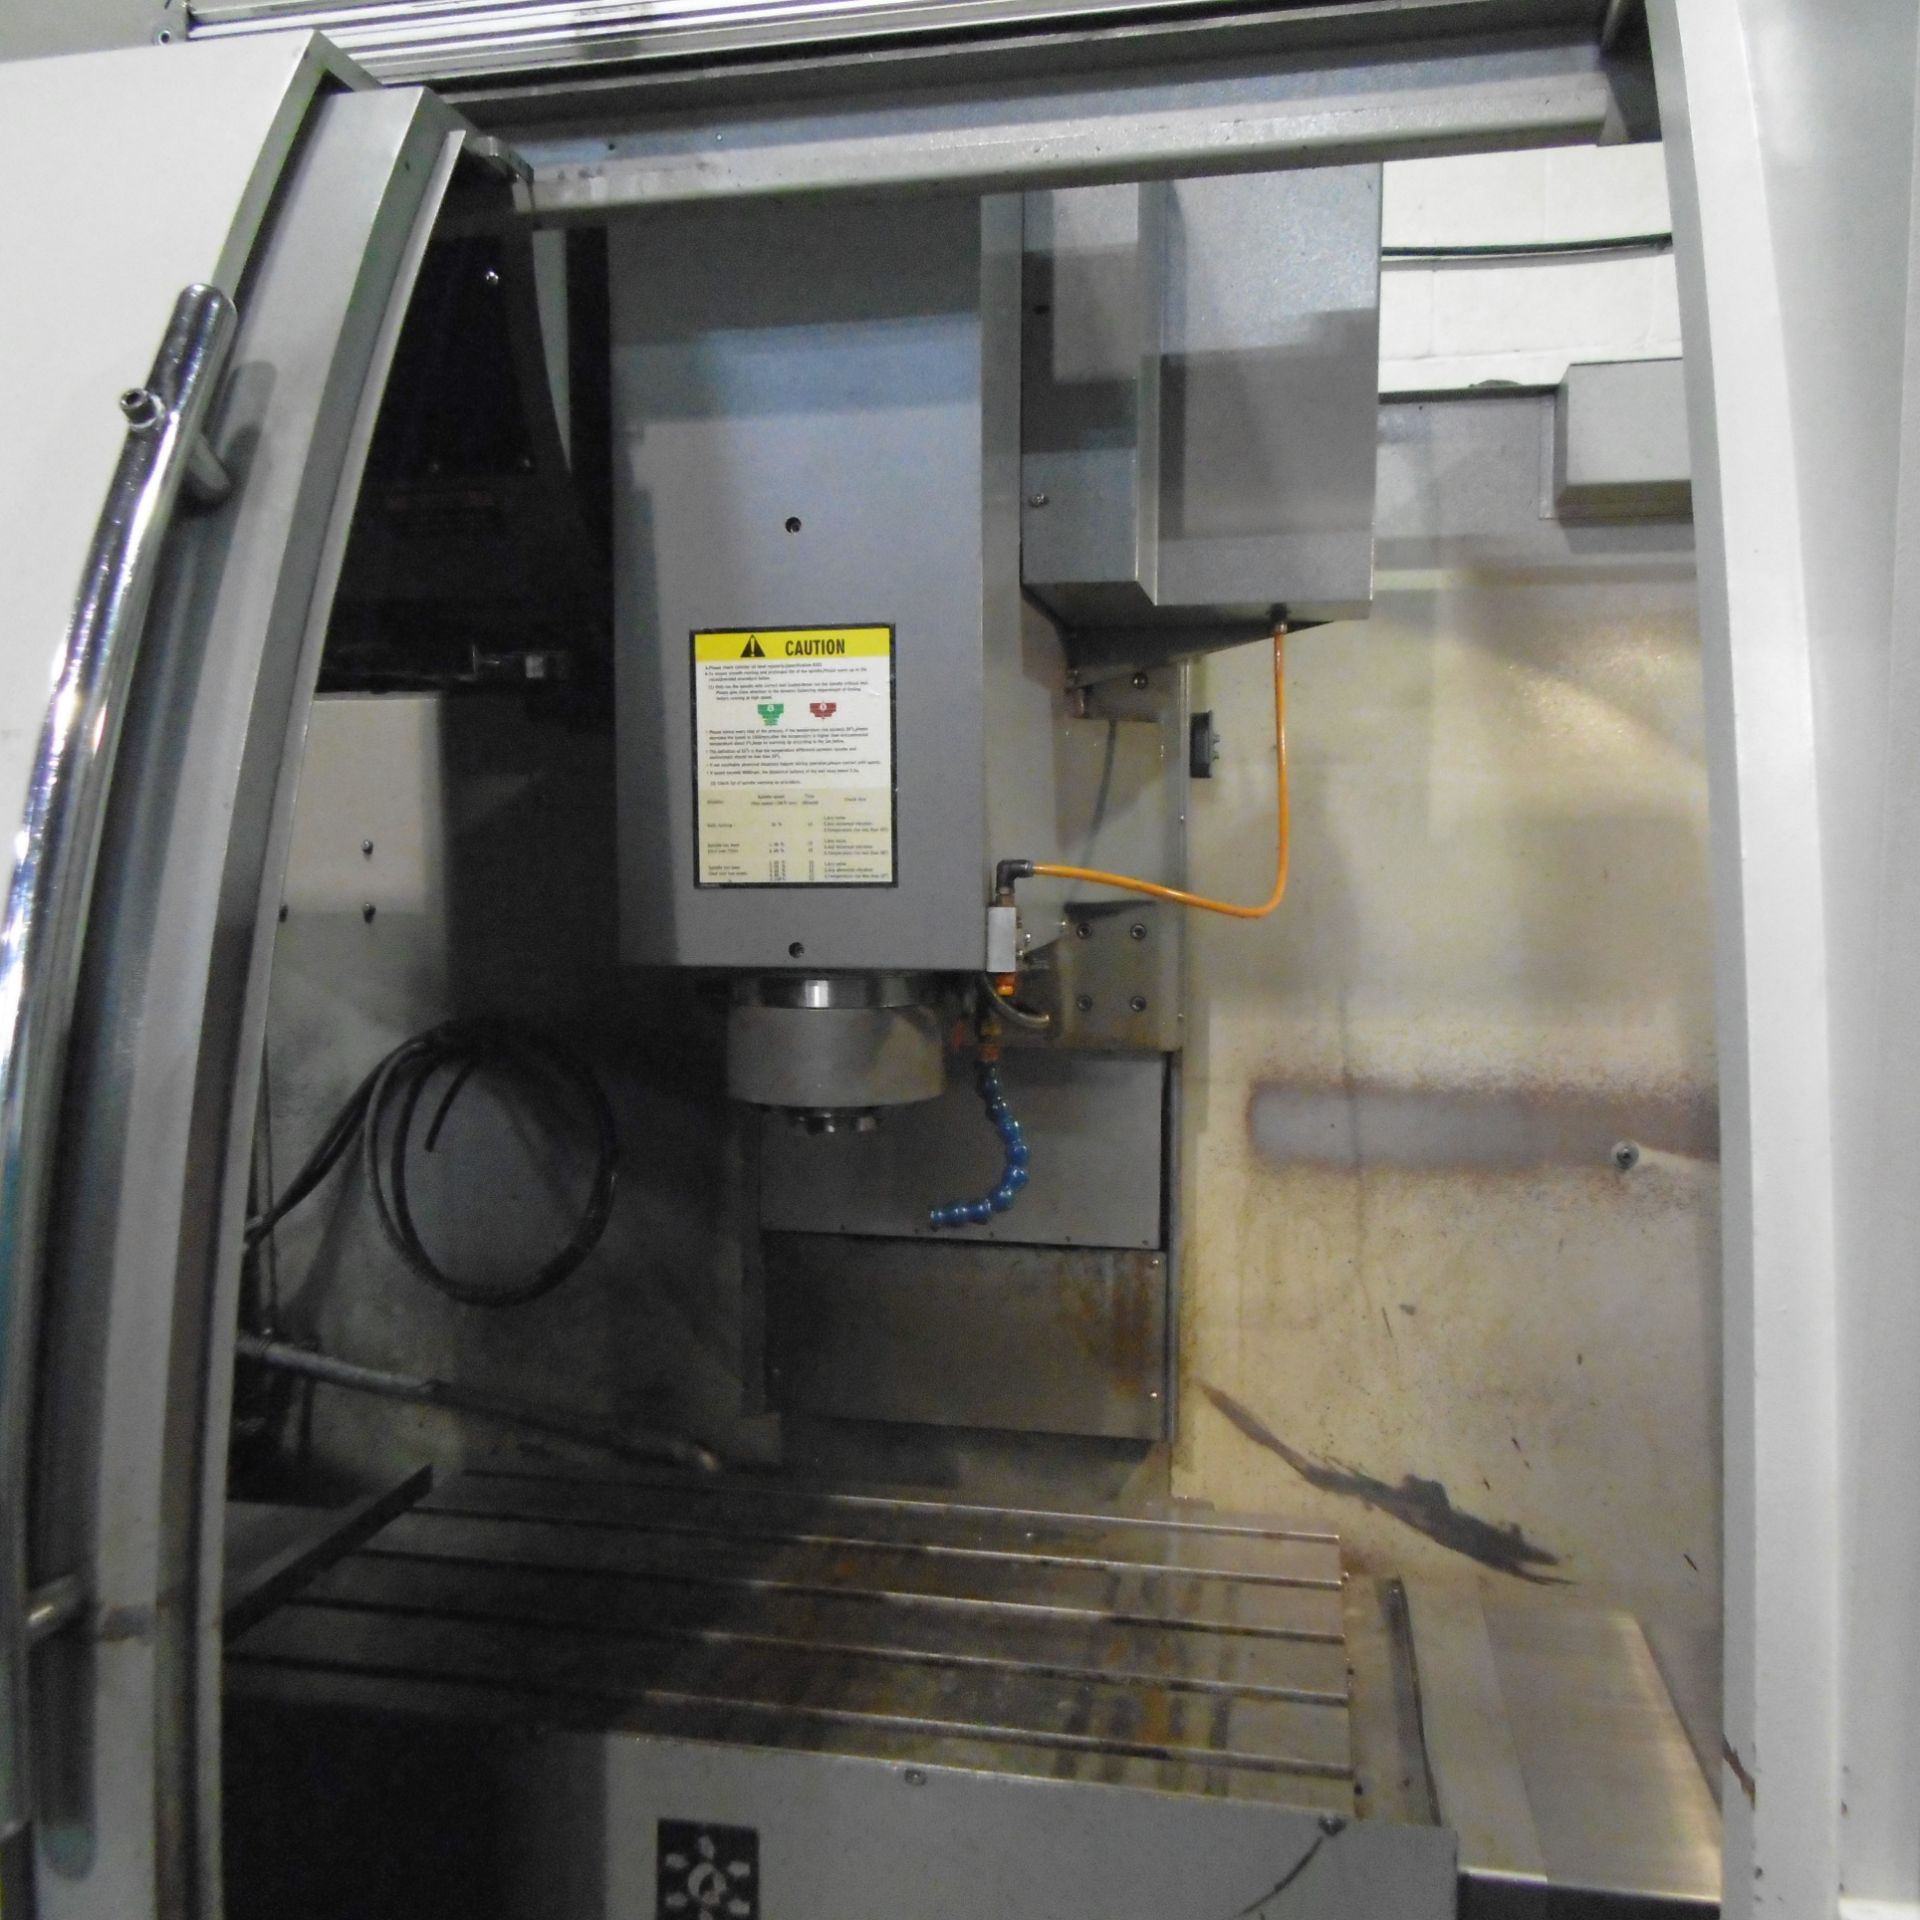 LEADWELL (2009) V-30I CNC VERTICAL MACHINING CENTER WITH FANUC OI-MC CNC CONTROL, TRAVELS X- 29. - Image 3 of 4